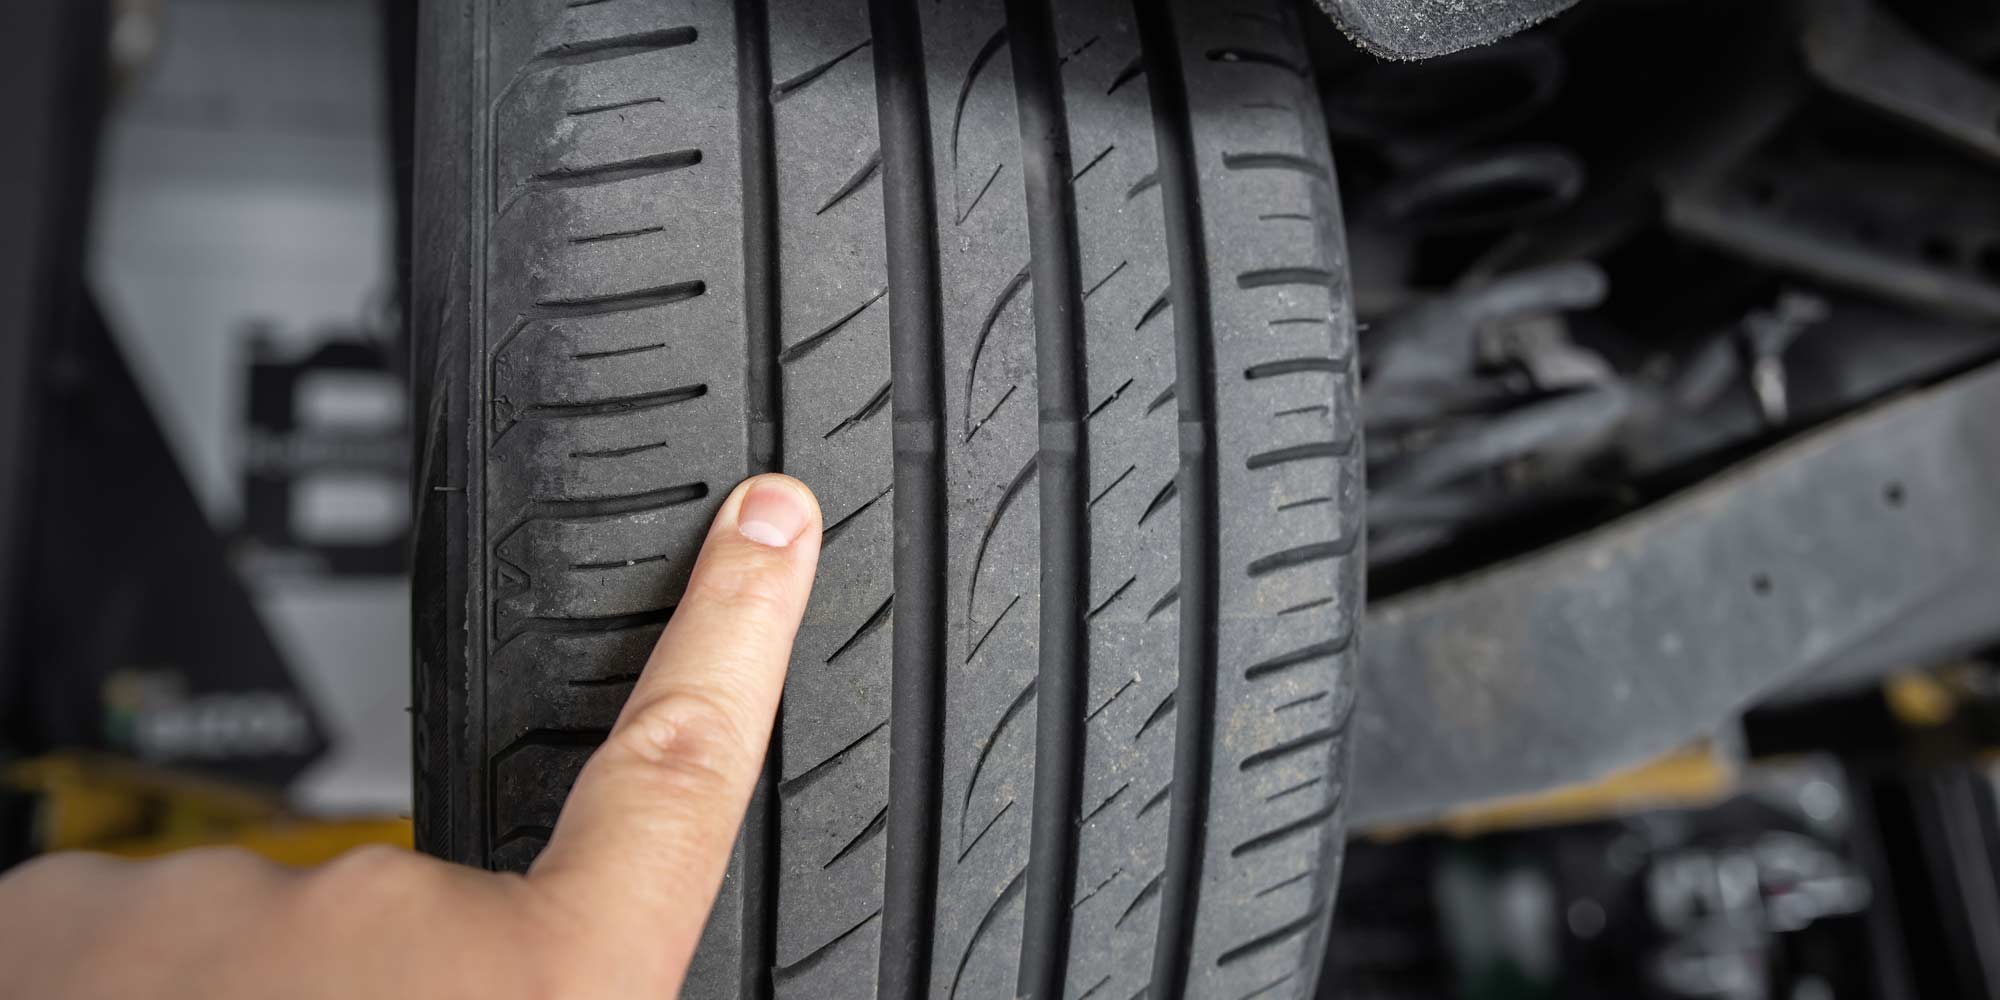 The Tire Cleaning Comparison Thread